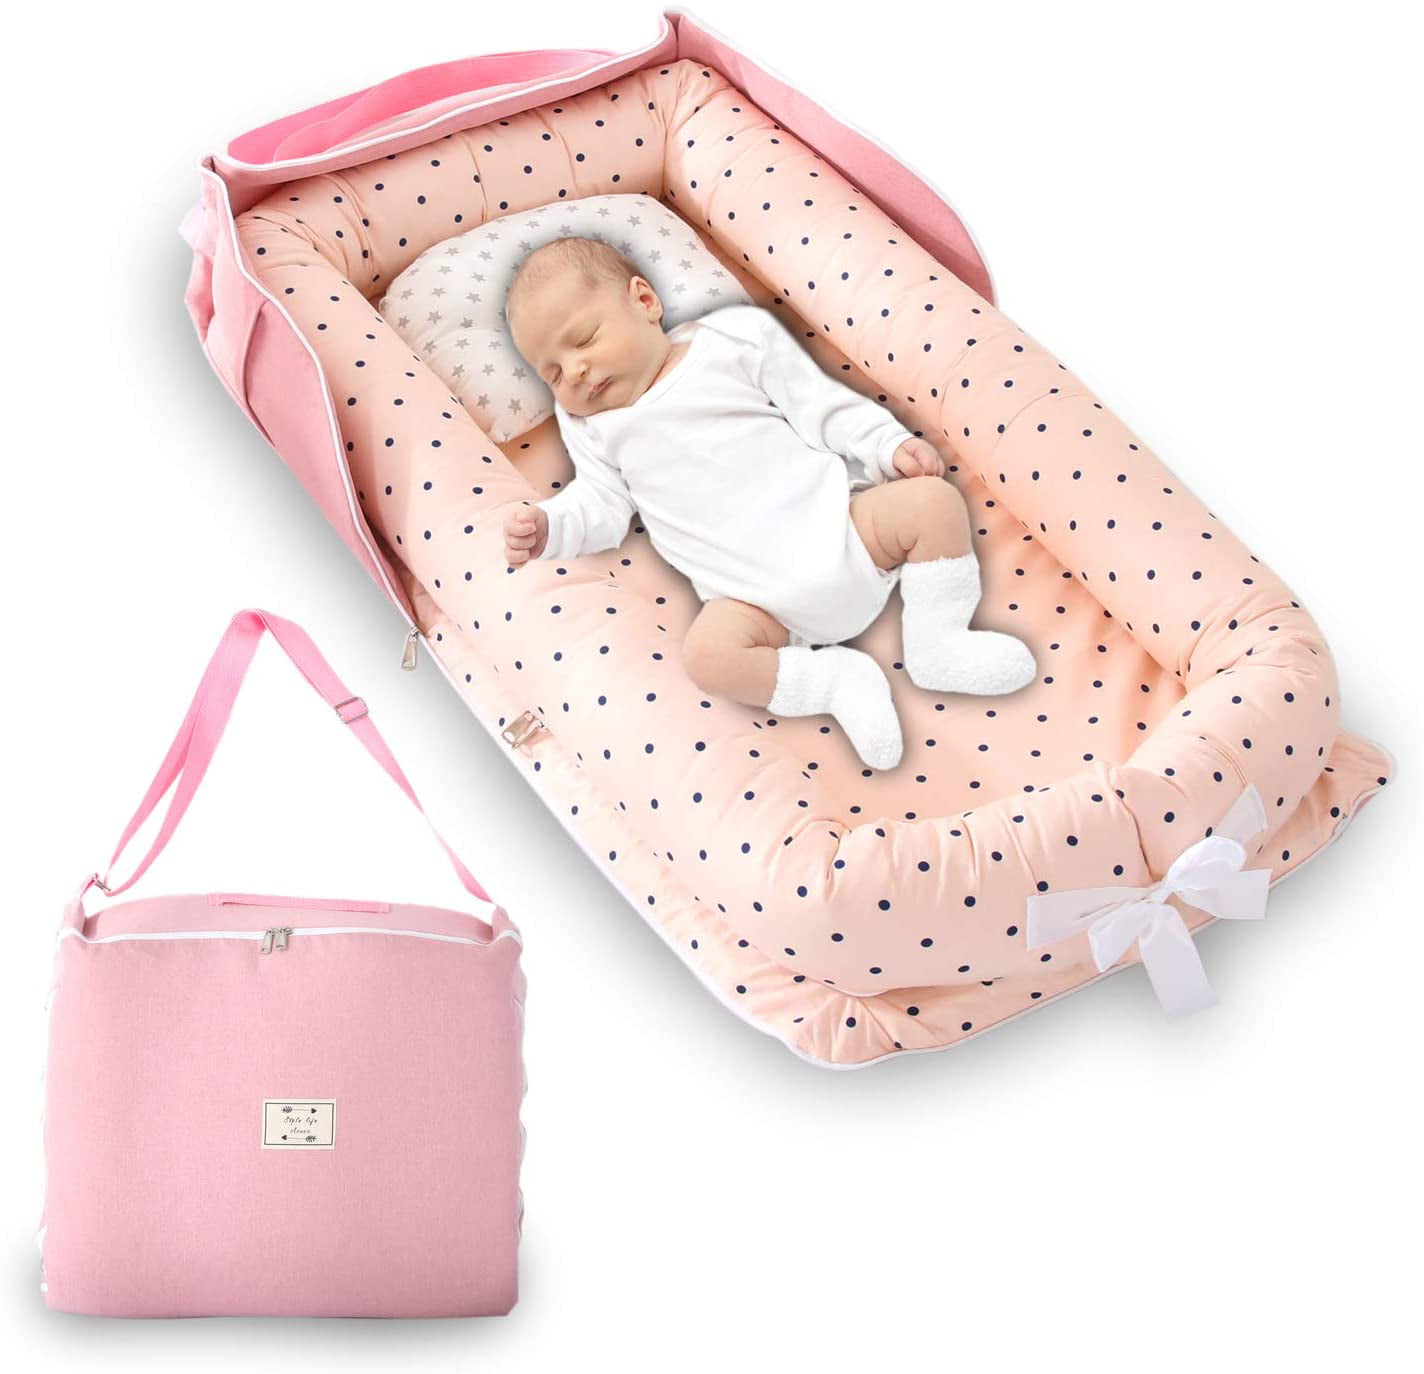 Pink Cozy Sleeping Nest Adjustable Size Crib Secondmum Portable Baby Bed Mattress with Ultra-Comfortable Body Pillow Lounger Cushion for Newborn Baby and Infant 